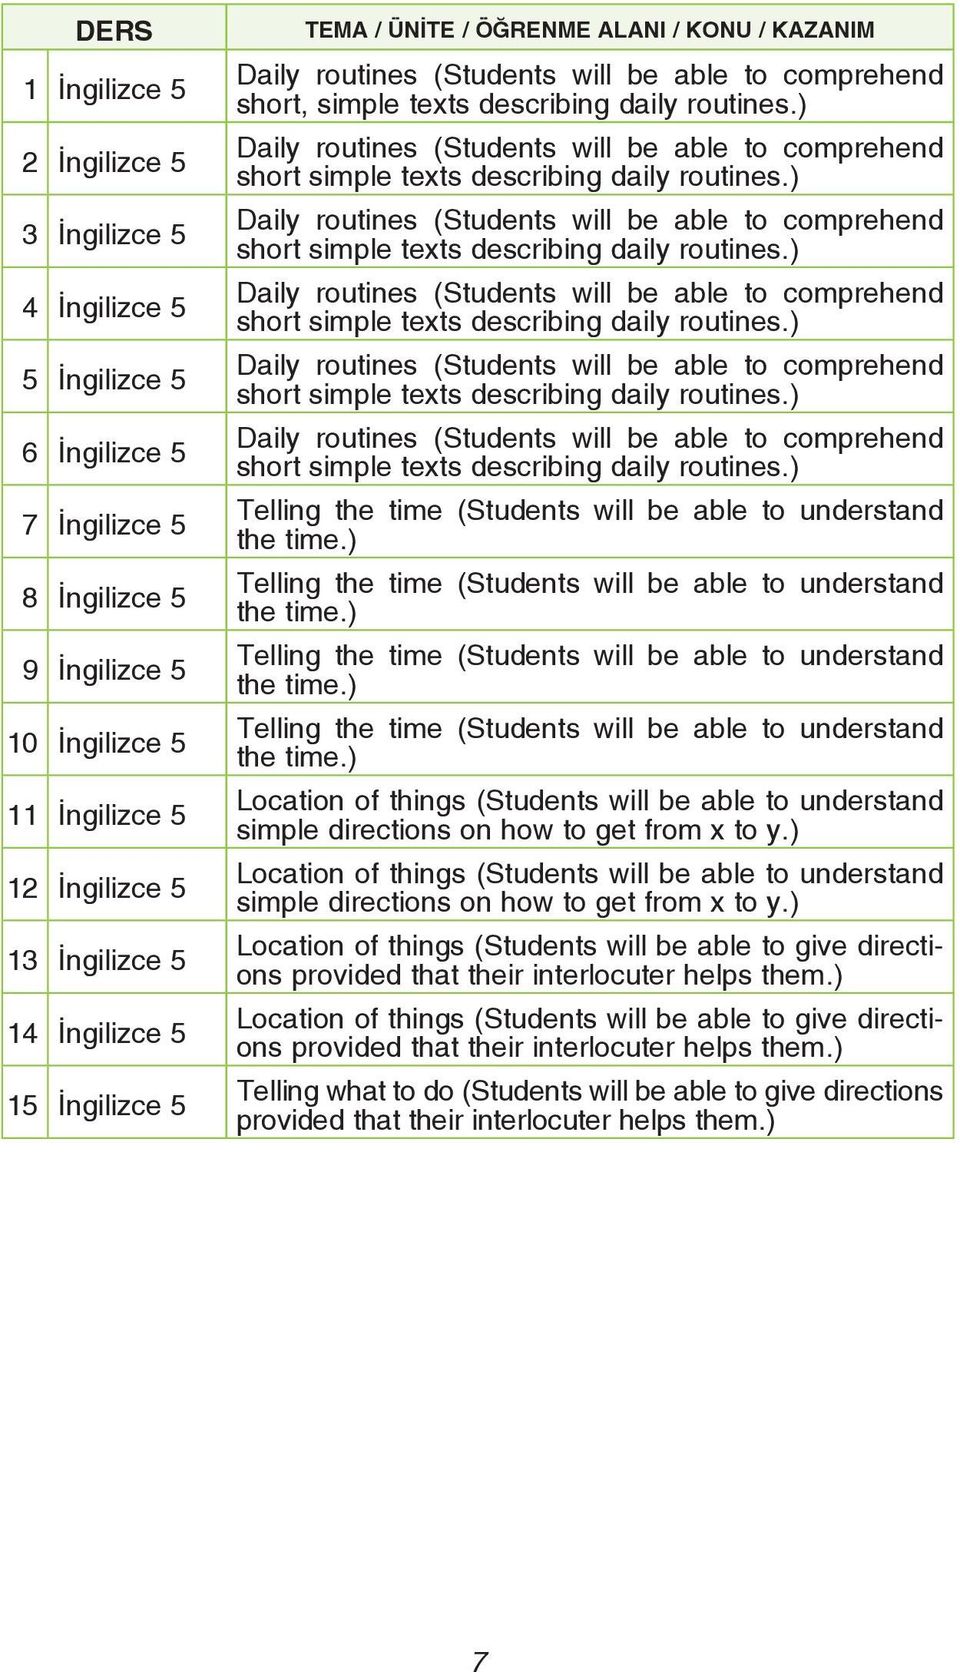 ) Daily routines (Students will be able to comprehend short simple texts describing daily routines.) Daily routines (Students will be able to comprehend short simple texts describing daily routines.) Daily routines (Students will be able to comprehend short simple texts describing daily routines.) Daily routines (Students will be able to comprehend short simple texts describing daily routines.) Daily routines (Students will be able to comprehend short simple texts describing daily routines.) Telling the time (Students will be able to understand the time.